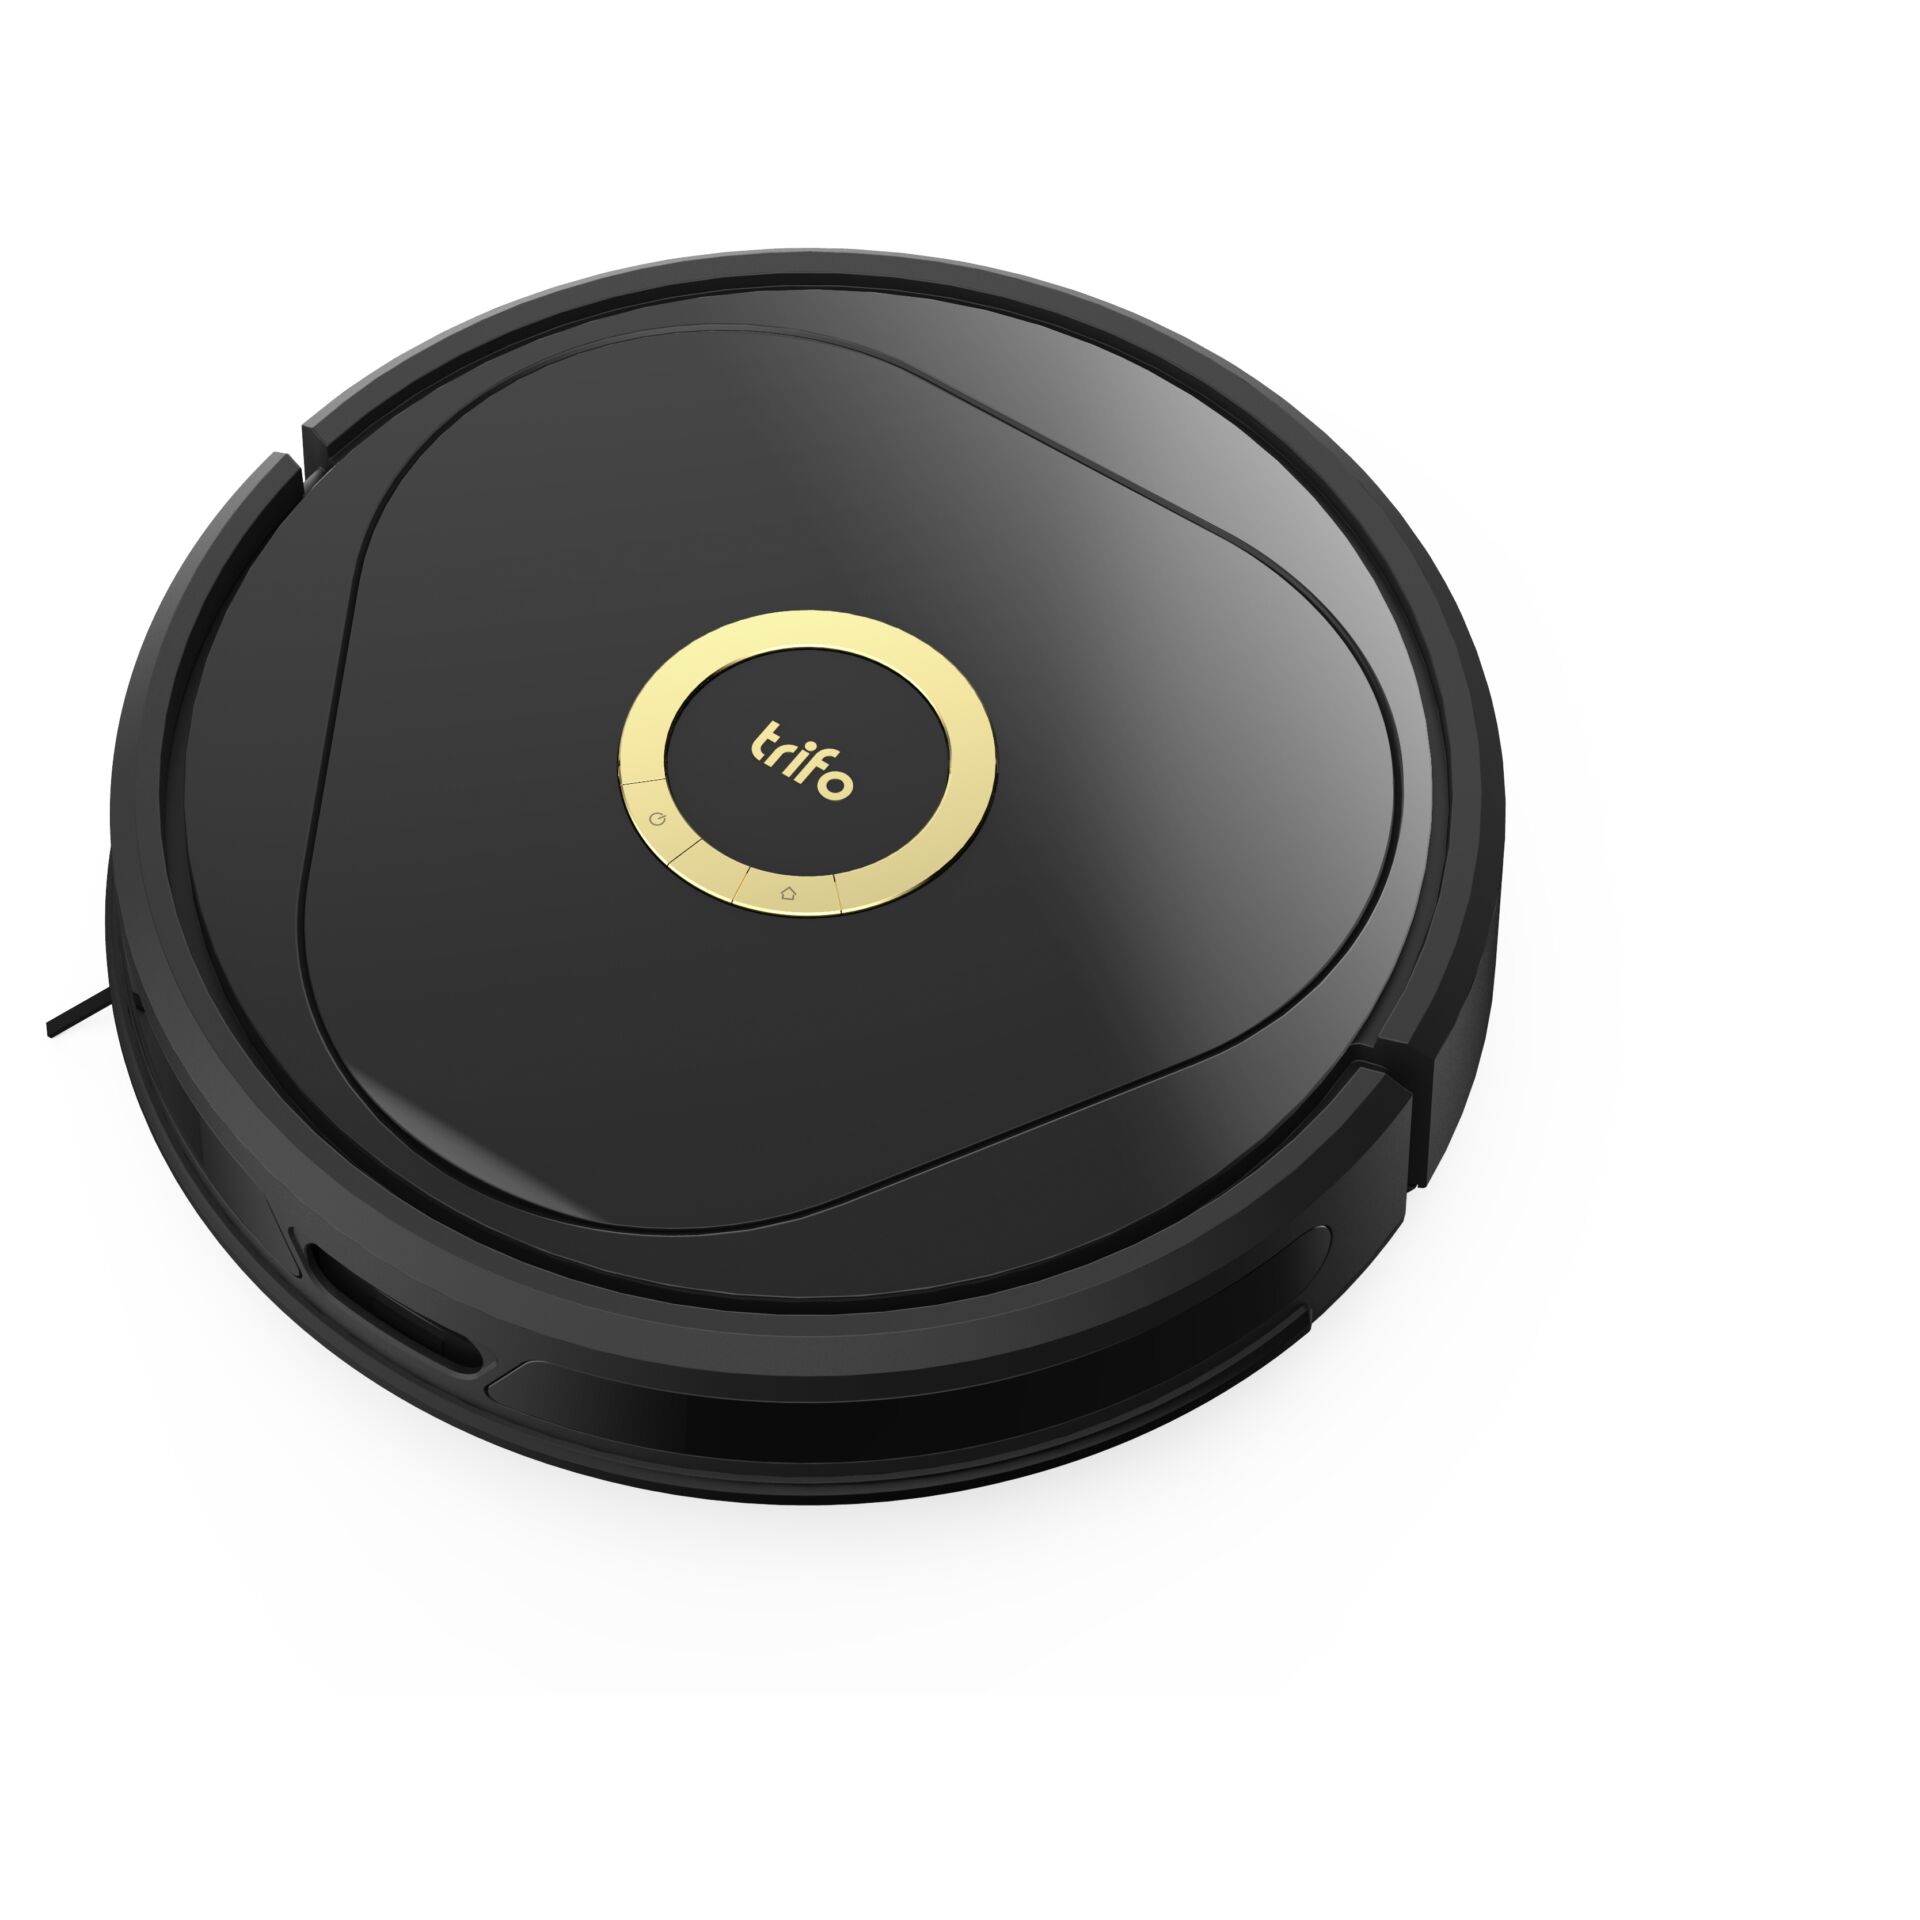 Trifo LUCY AI Home Robot Vacuum / Mopping Robot